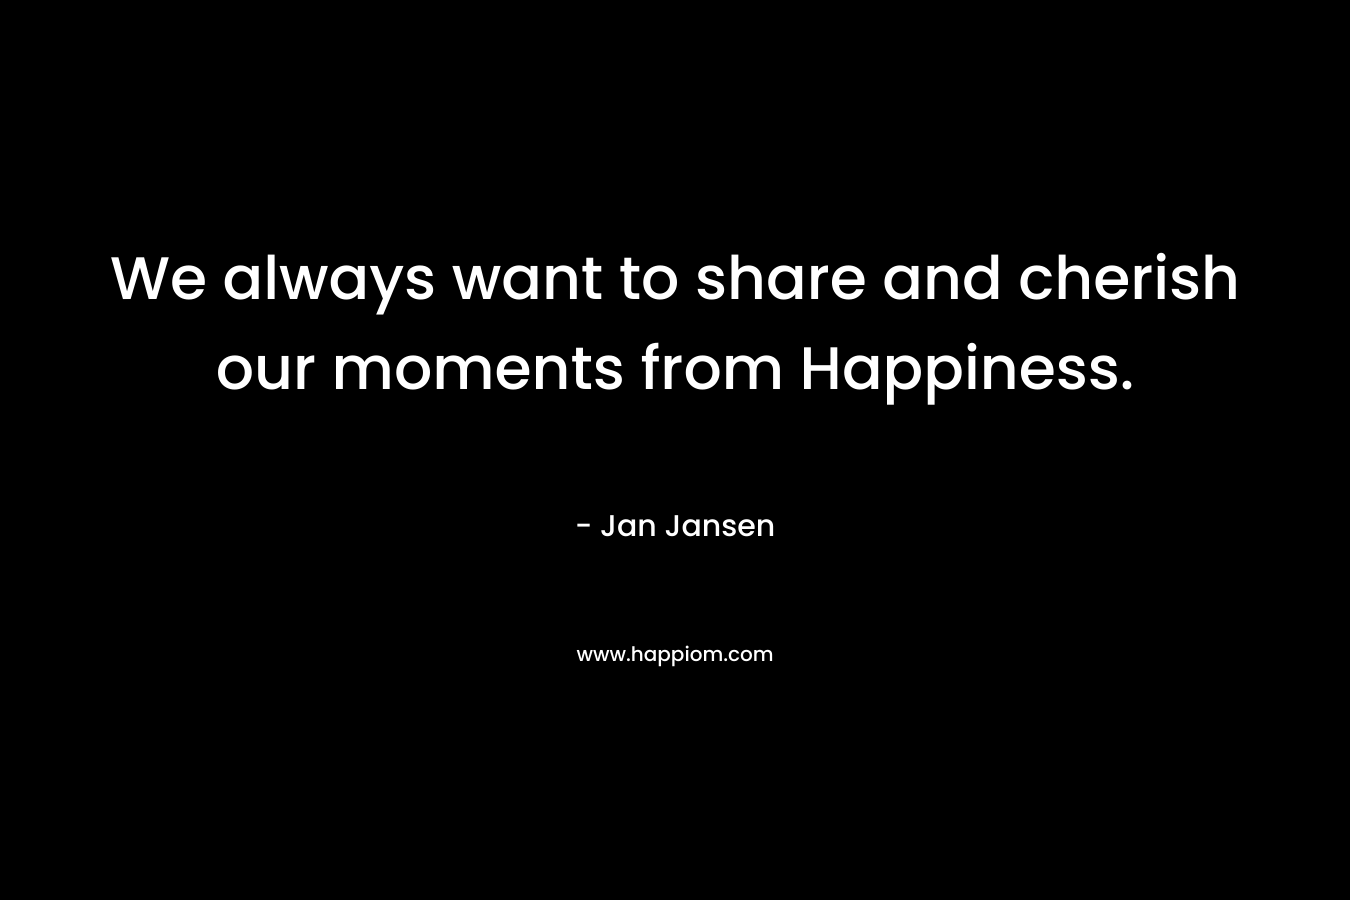 We always want to share and cherish our moments from Happiness. – Jan Jansen